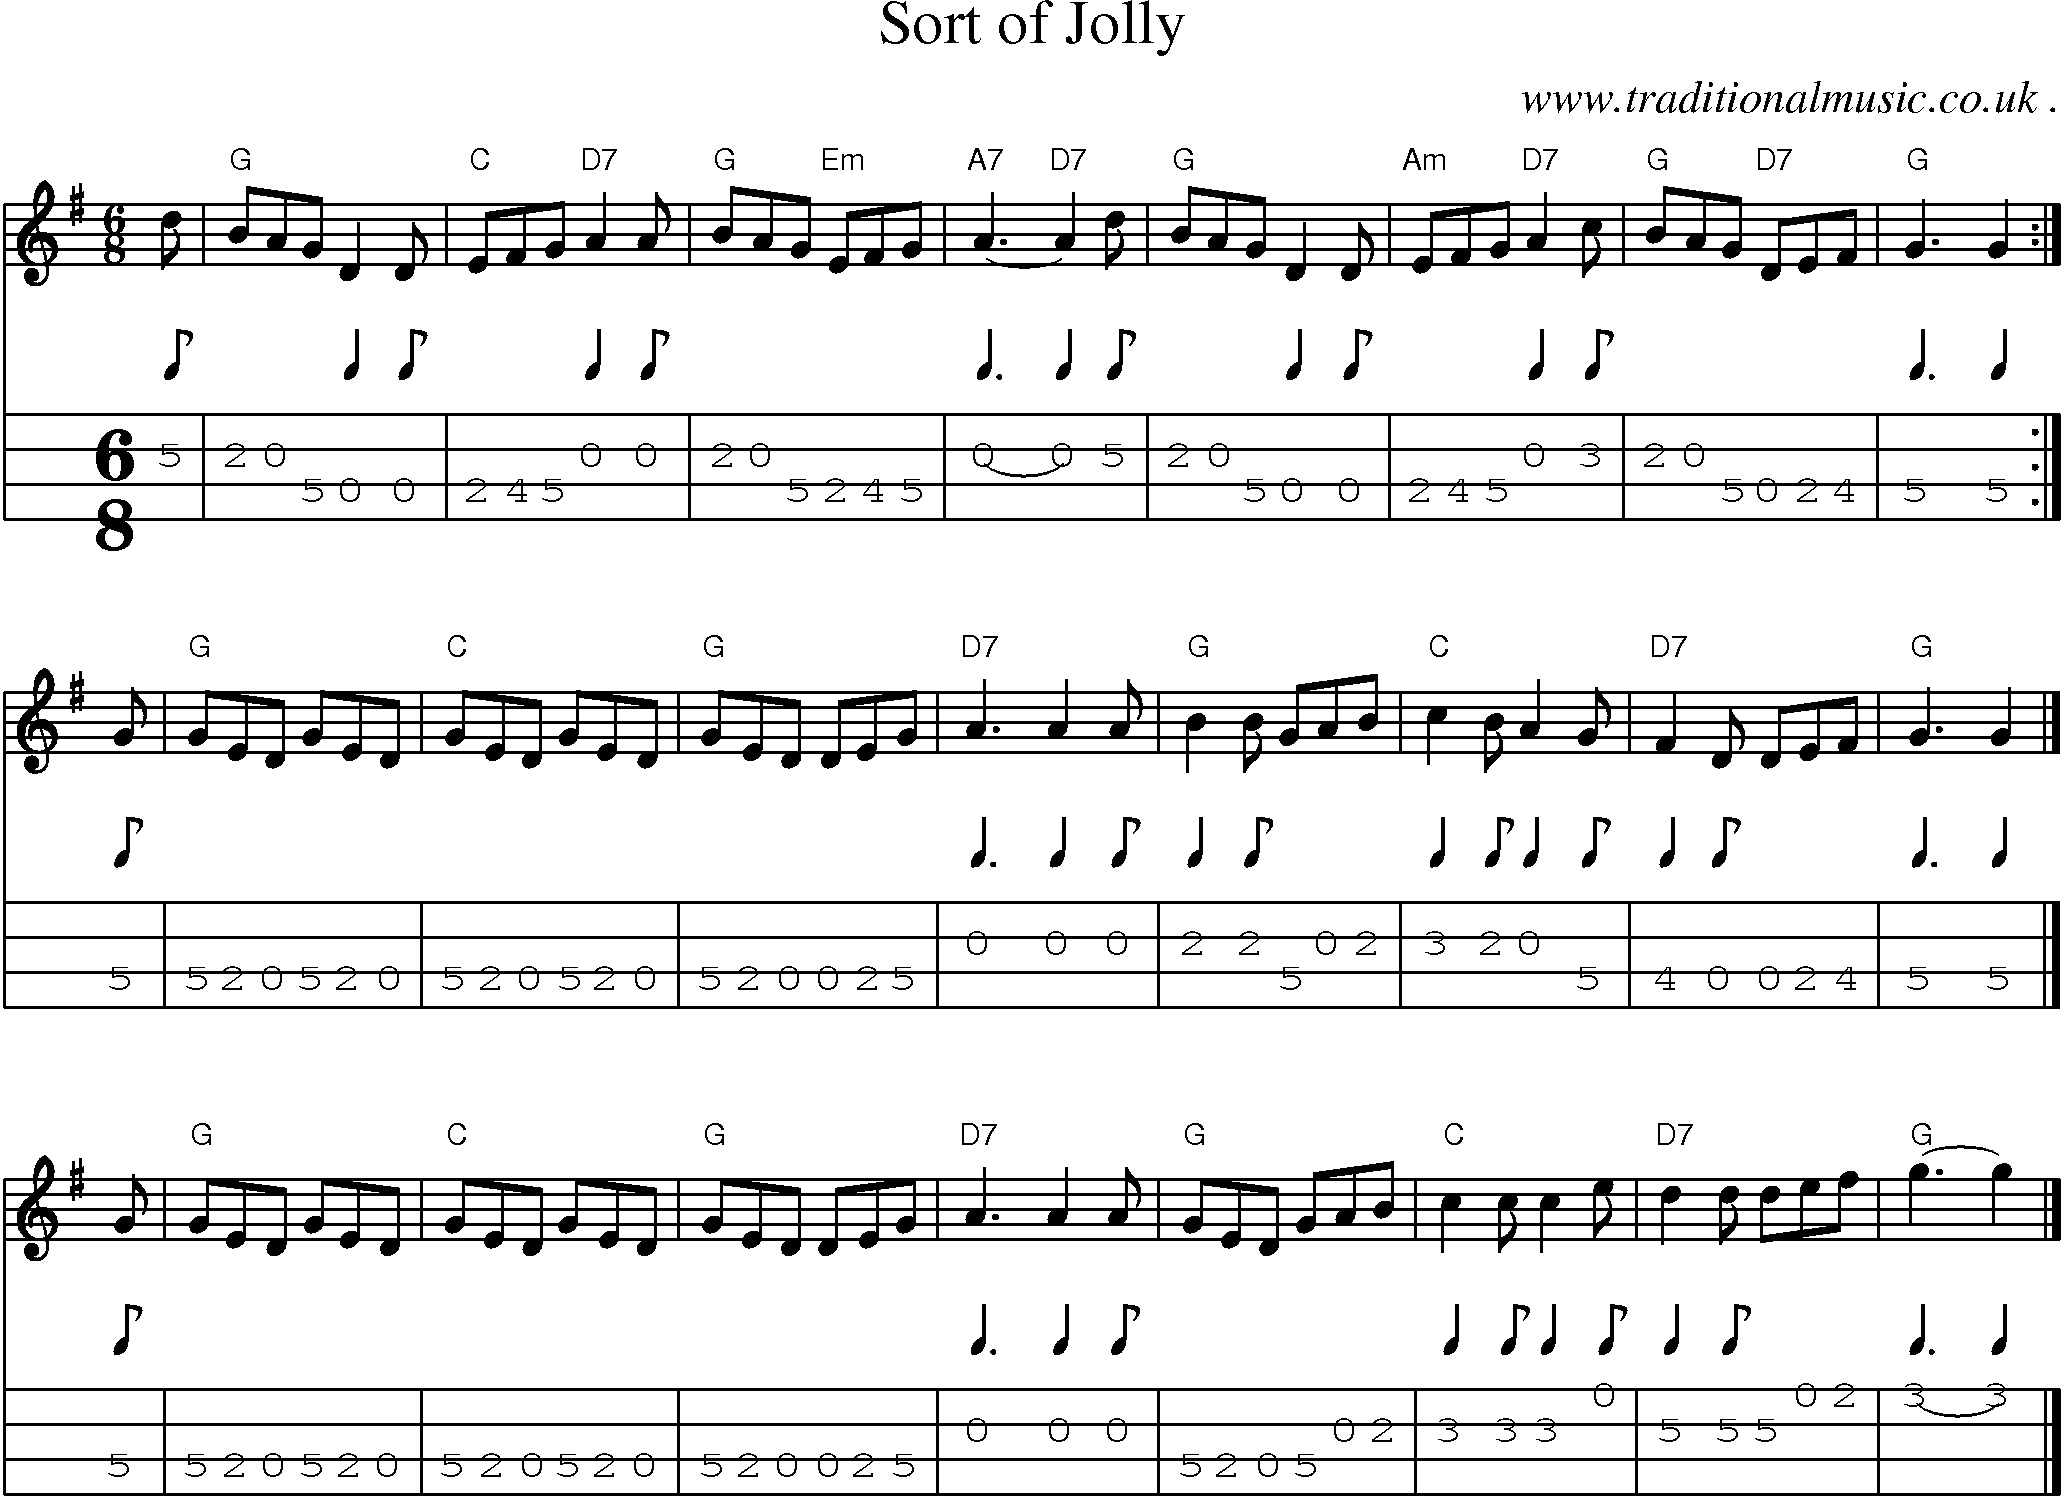 Sheet-music  score, Chords and Mandolin Tabs for Sort Of Jolly